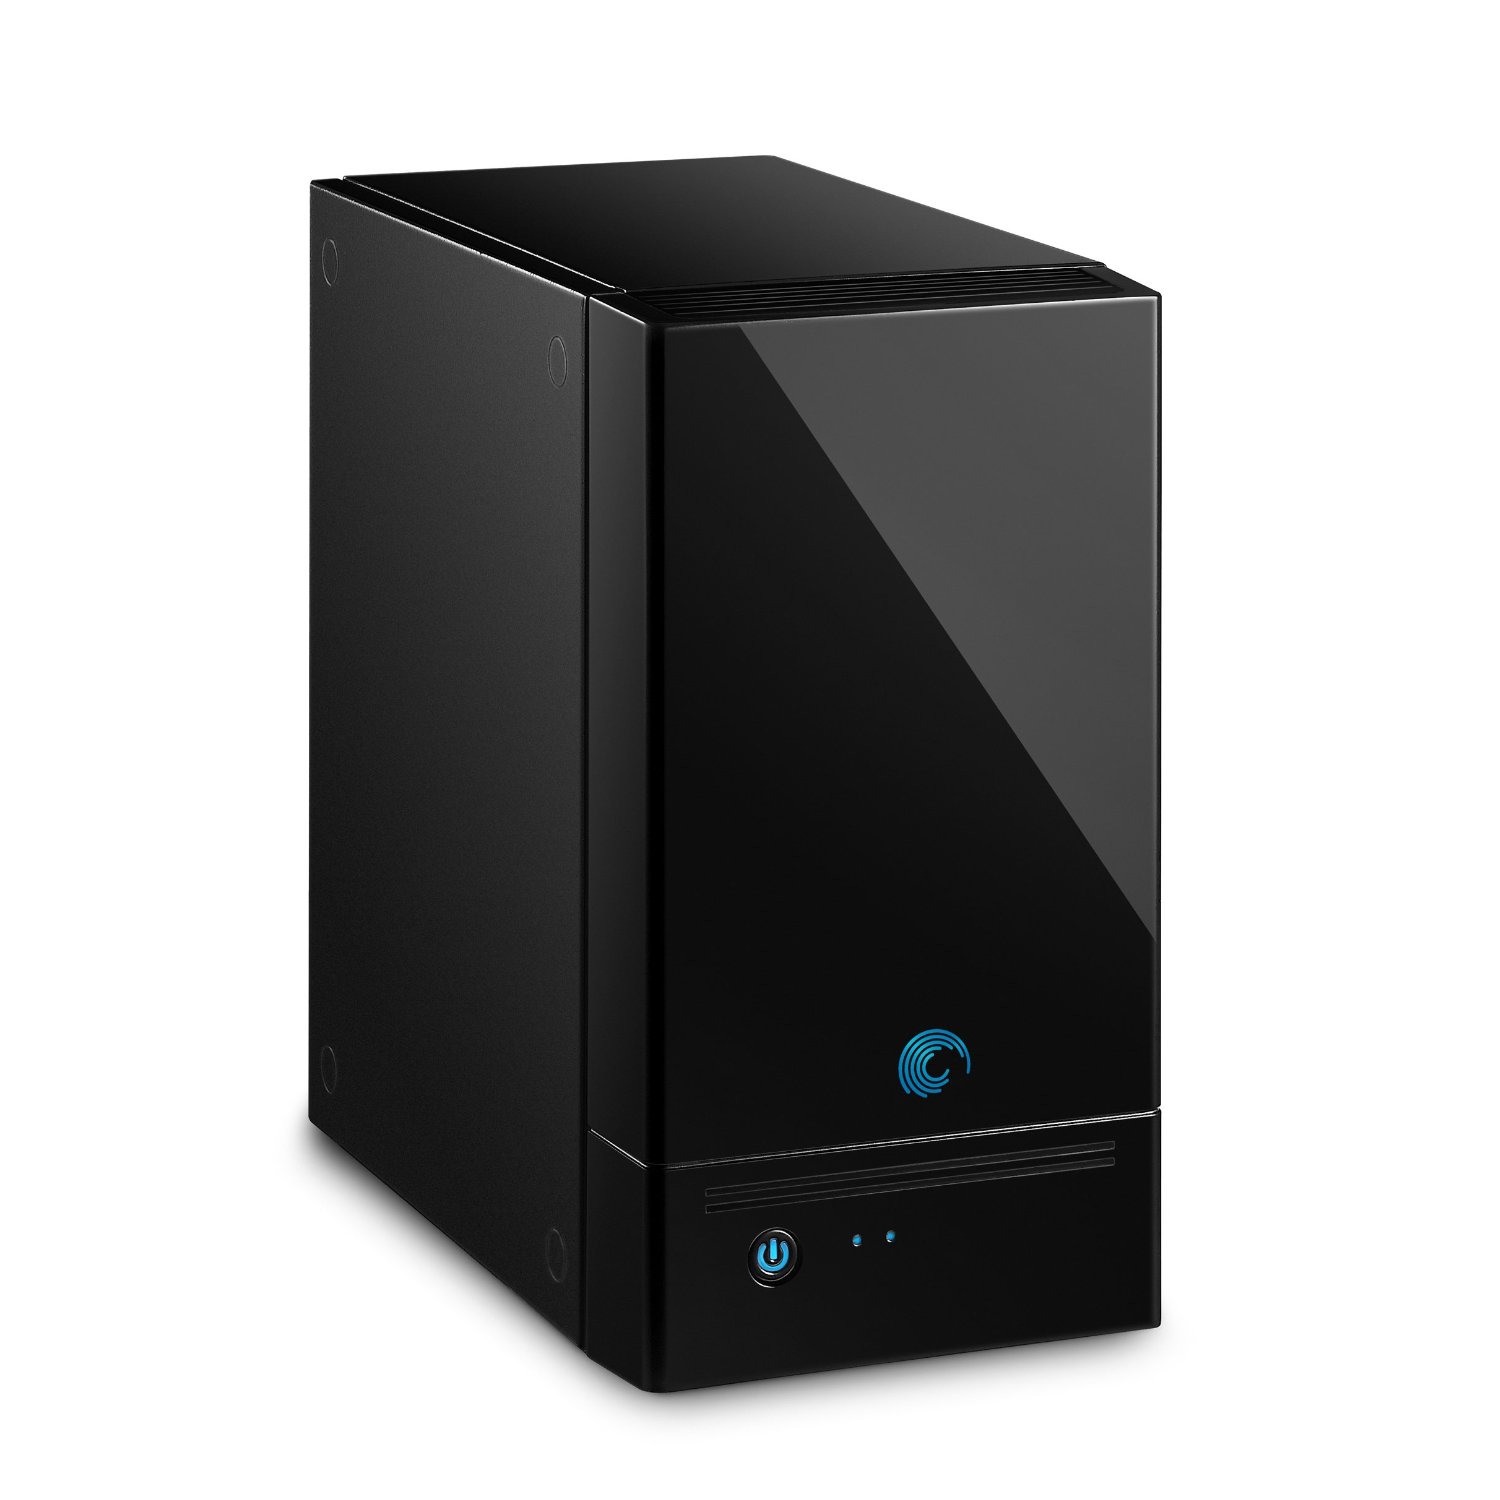 http://thetechjournal.com/wp-content/uploads/images/1110/1319622655-seagate-blackarmor-nas-220-2bay-4-tb-network-attached-storage-1.jpg